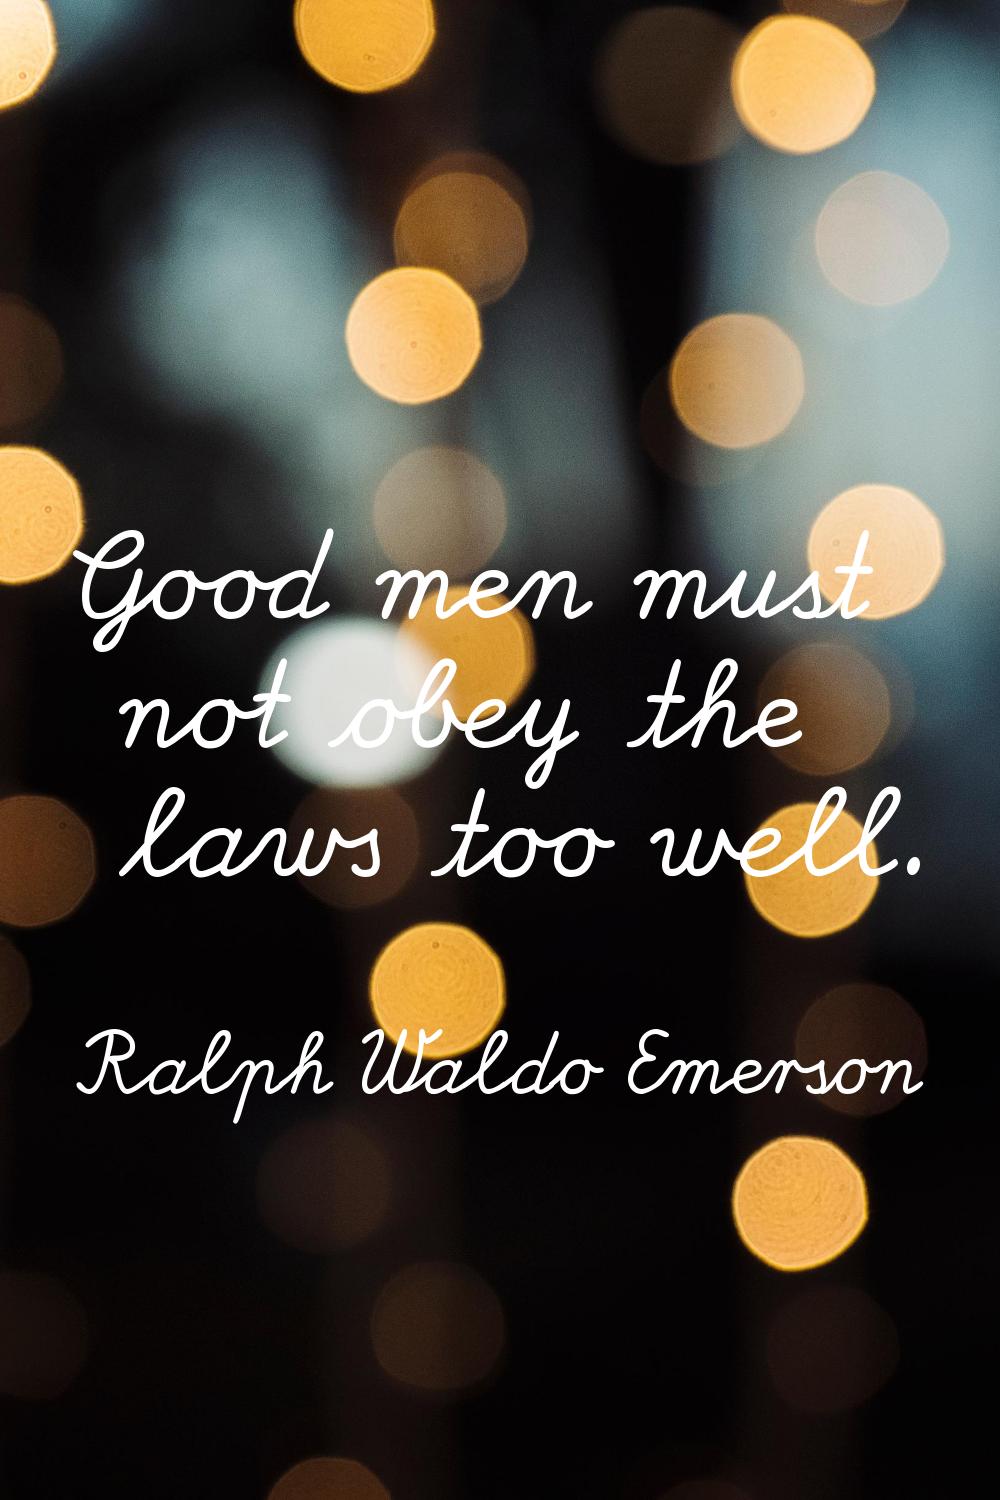 Good men must not obey the laws too well.